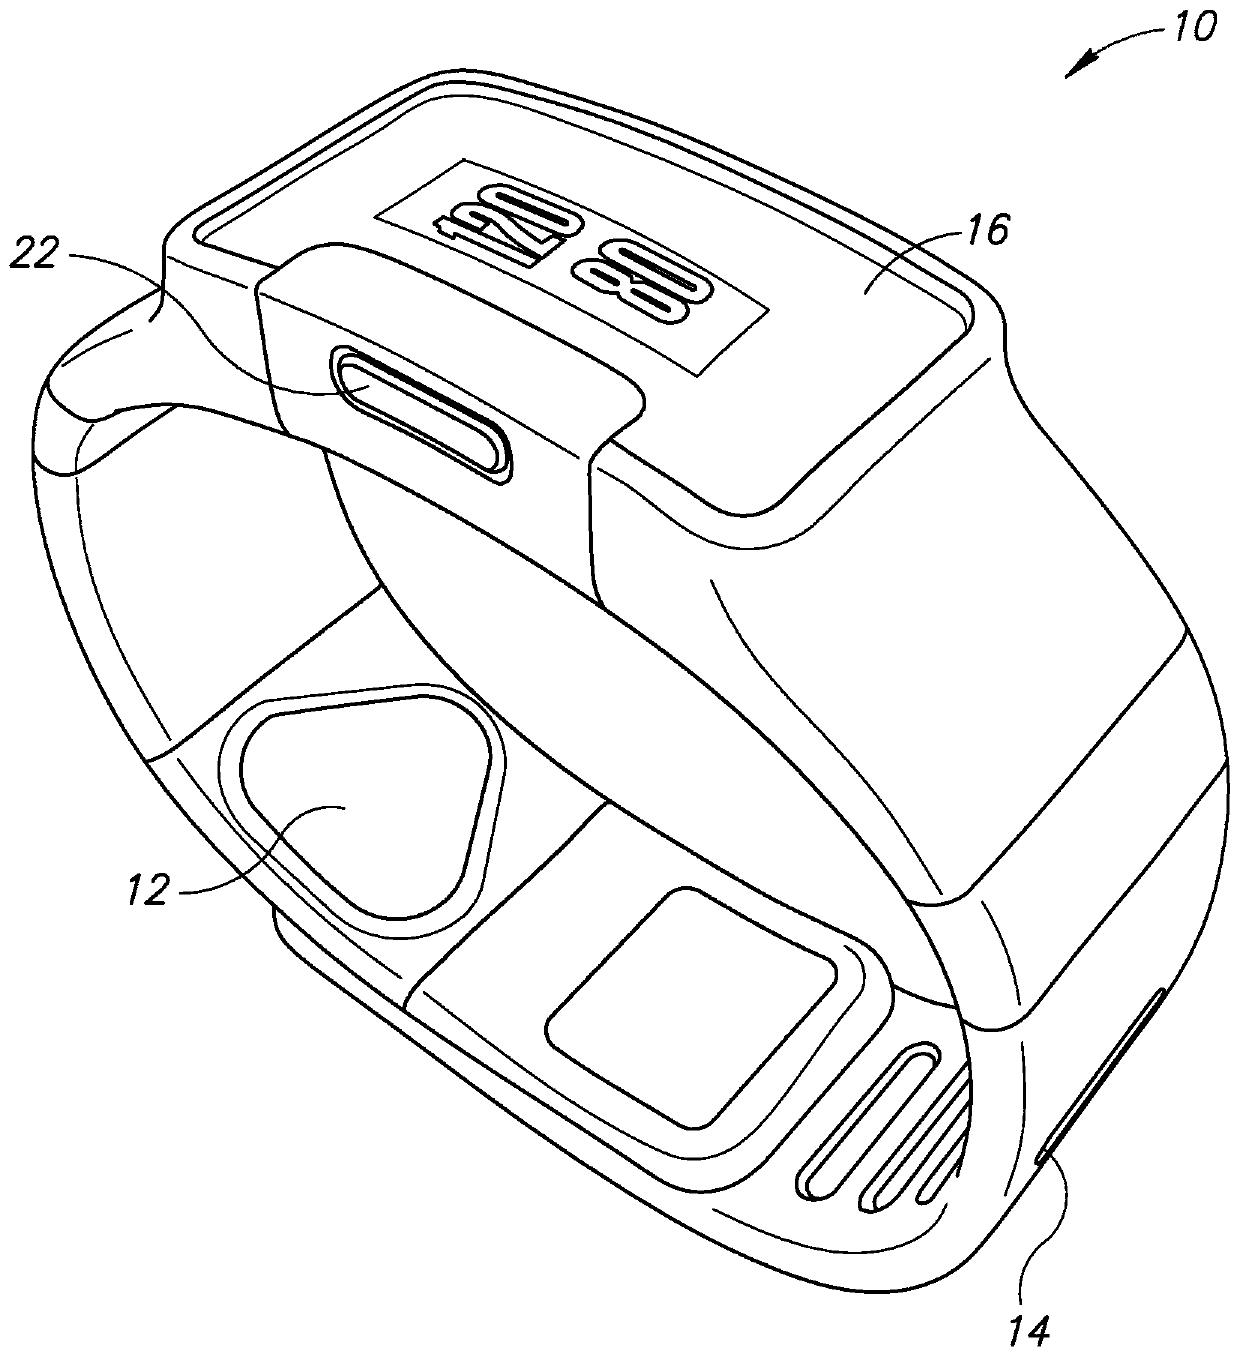 Method and system for ventricular assistive device adjustment using a wearable device